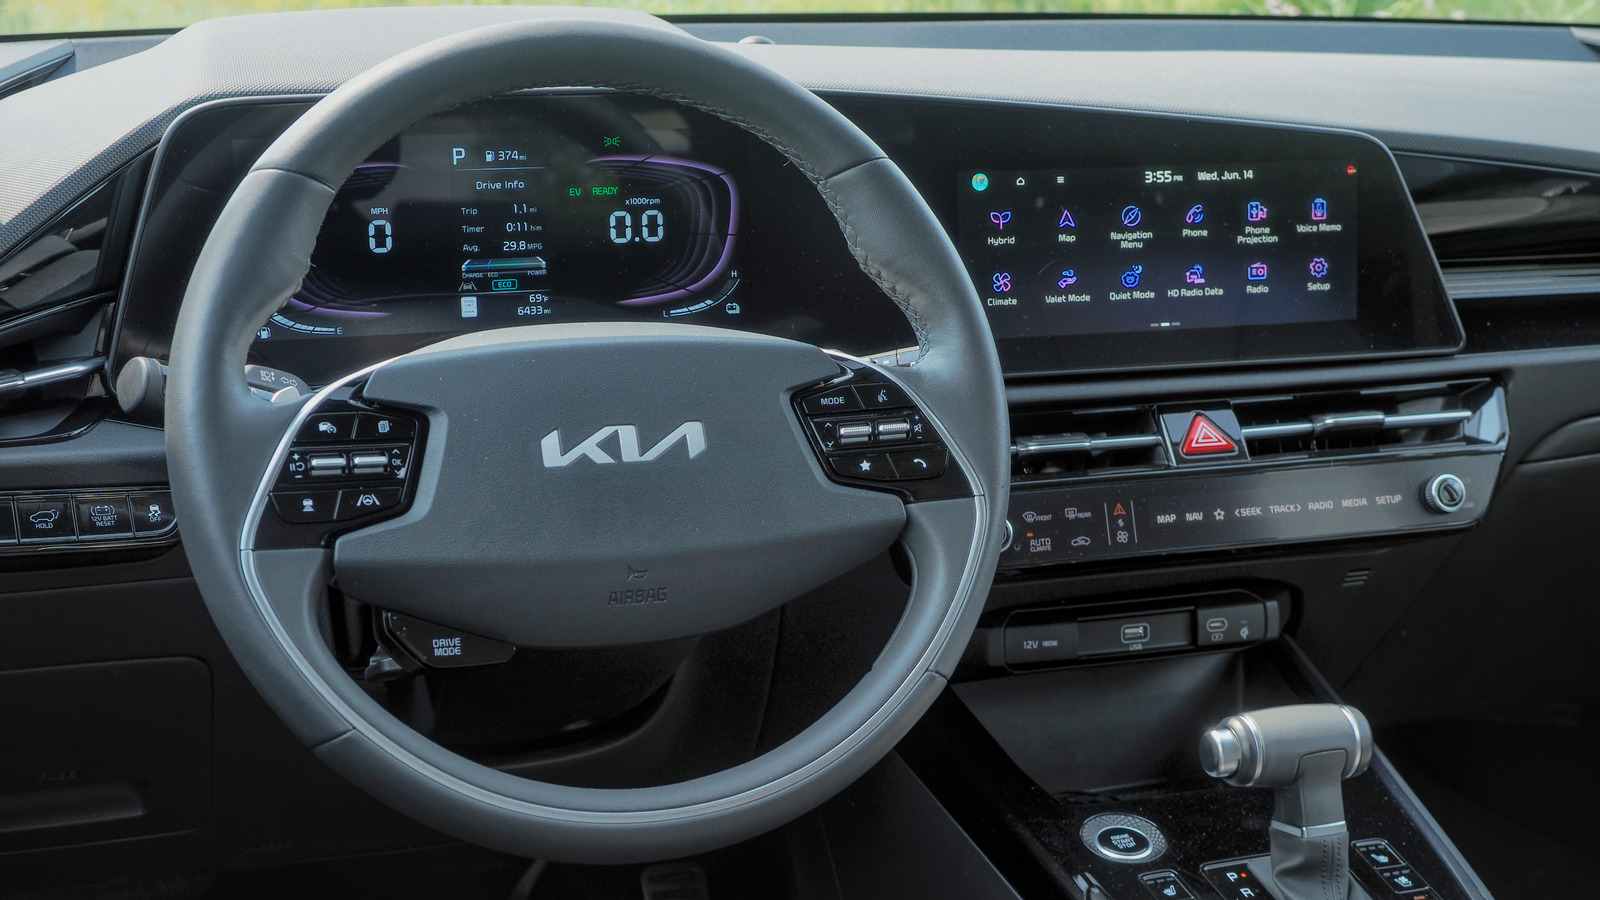 This Kia Cabin Feature Is Genius All Automakers Should Steal